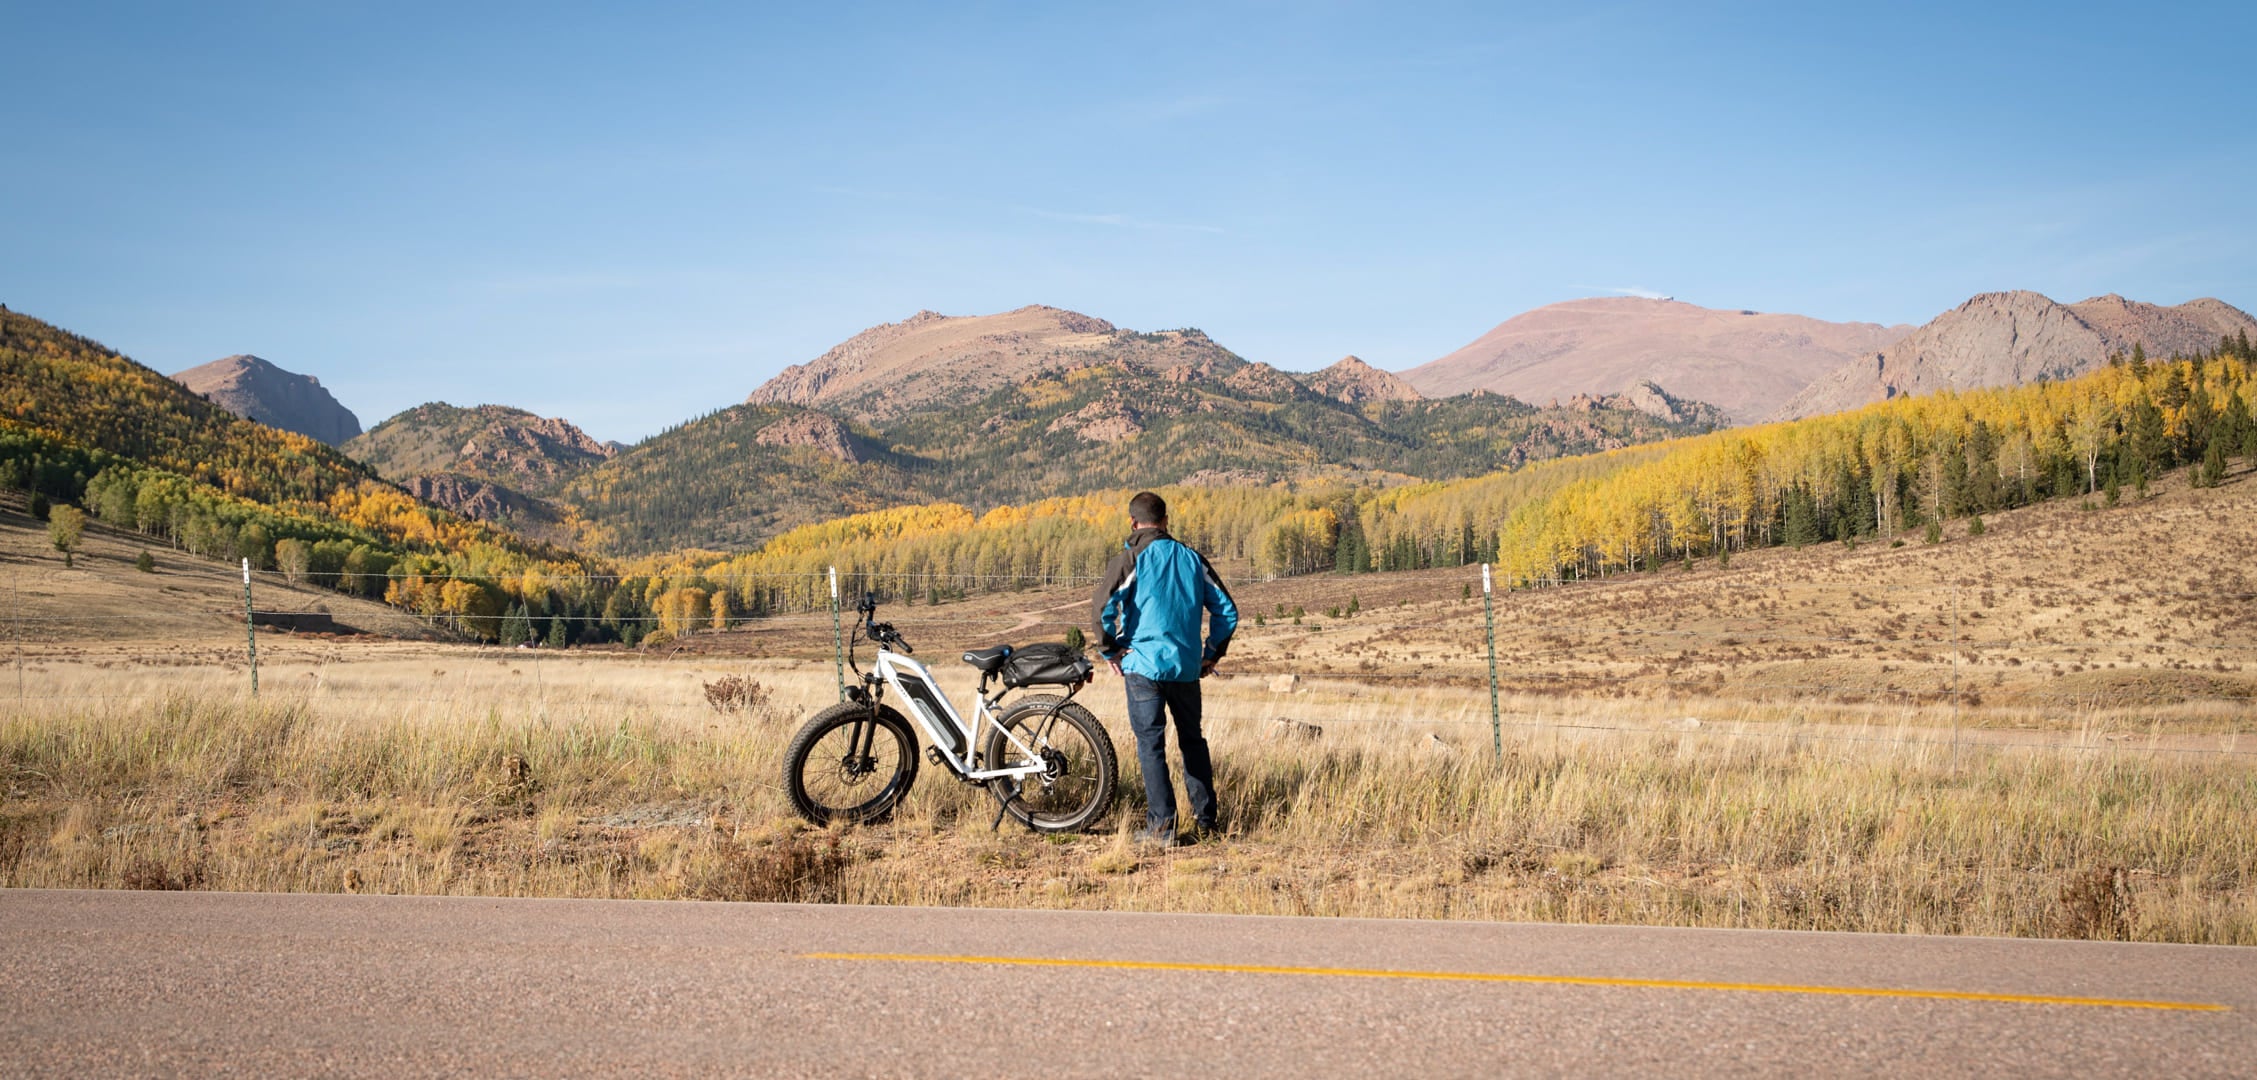 E-Bike Adventures in U.S. National Parks: What You Should Know